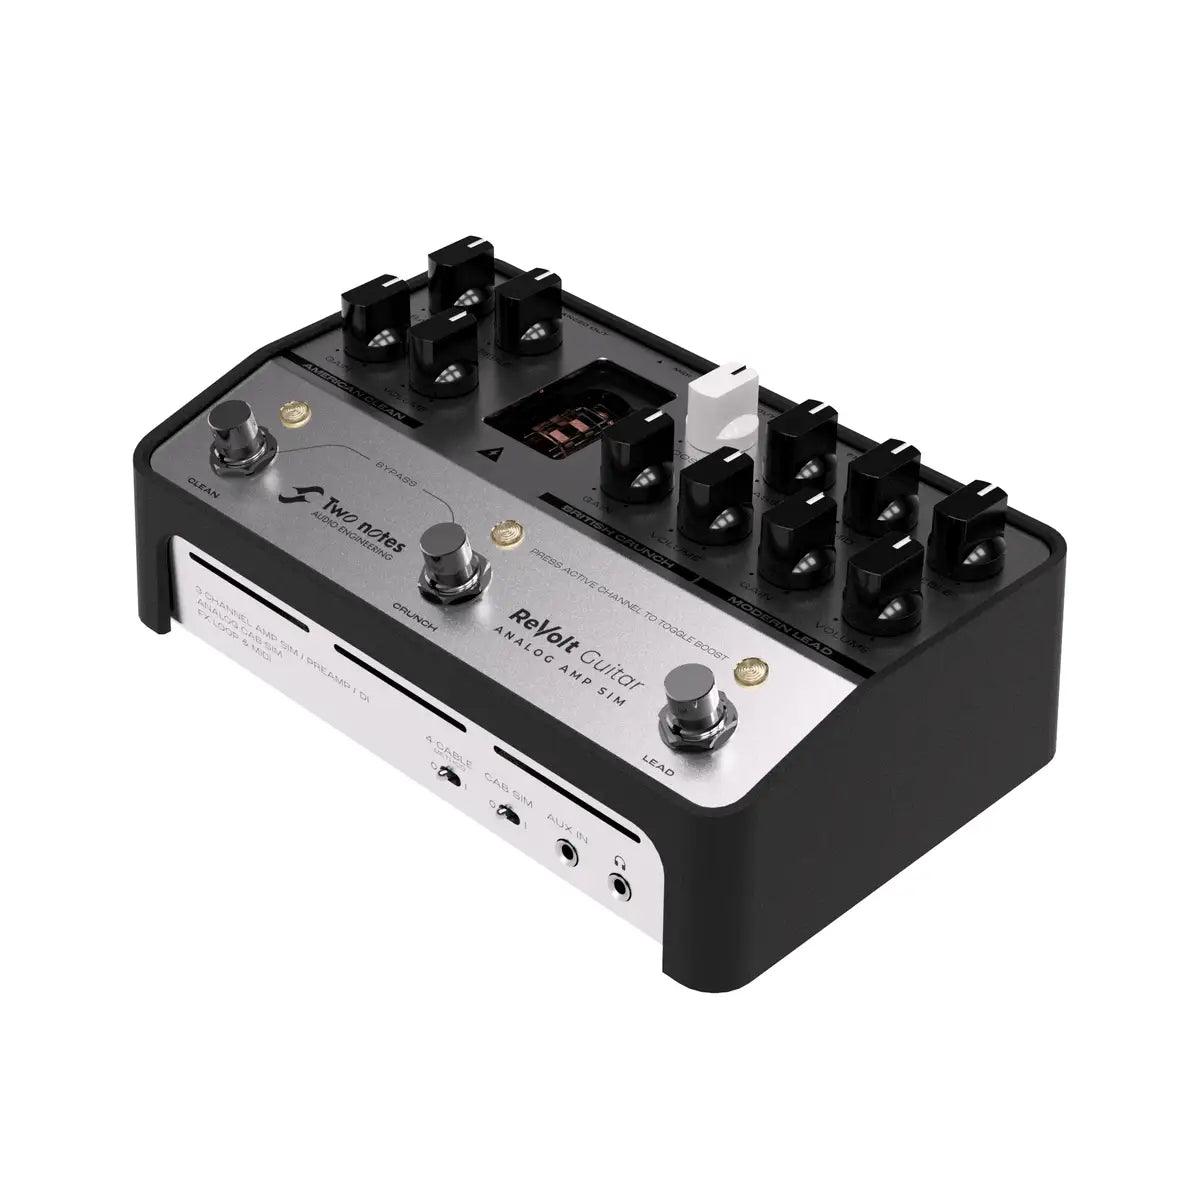 Revolt Guitar 3 Channel Analogue Amp Sim - Guitar - Effects Pedals by Two Notes at Muso's Stuff